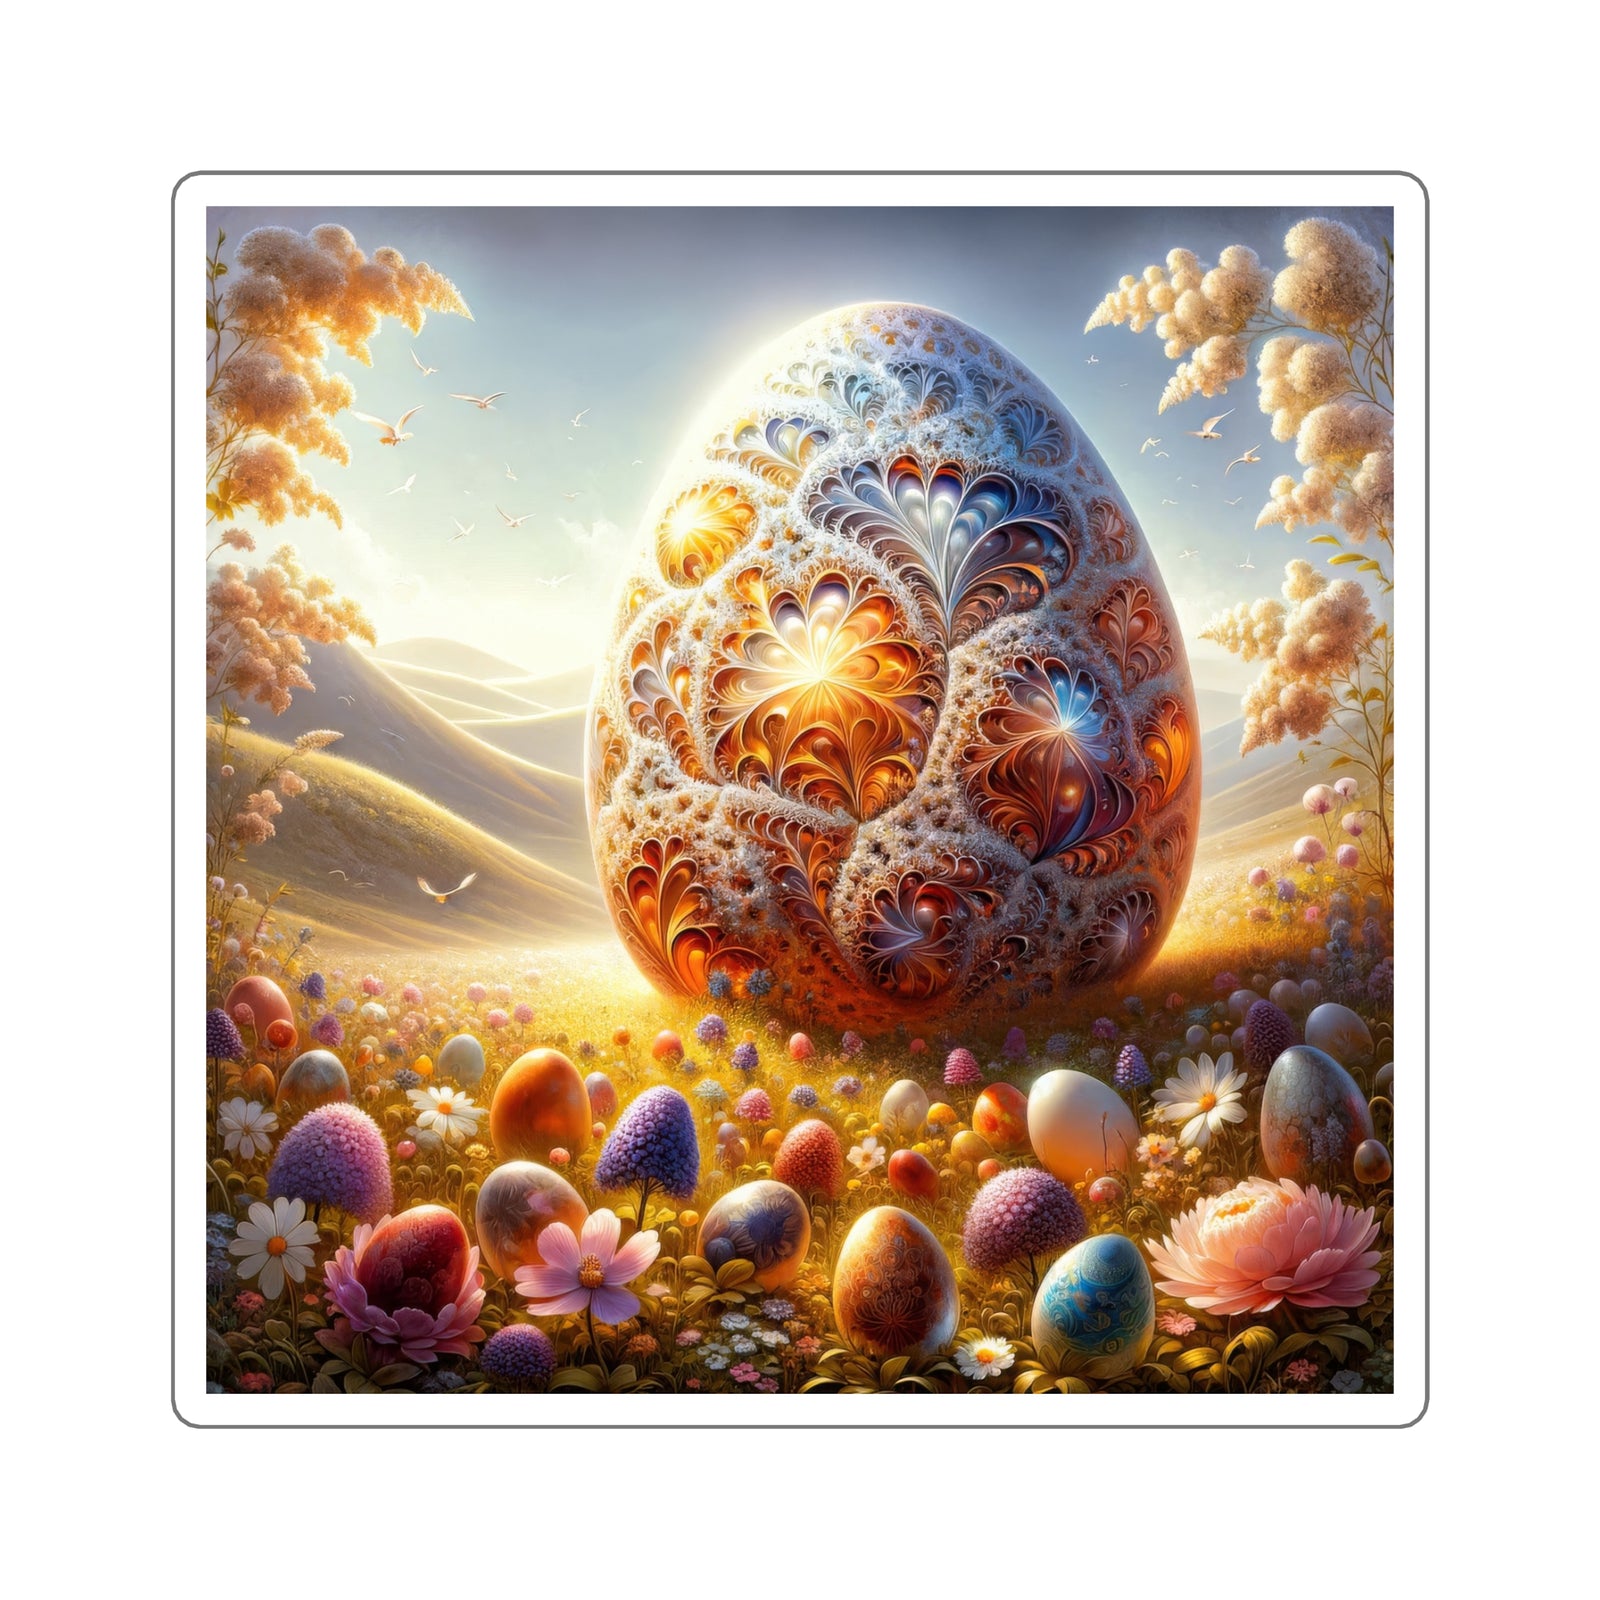 The Opulent Egg: Nature's Artistic Heart Stickers